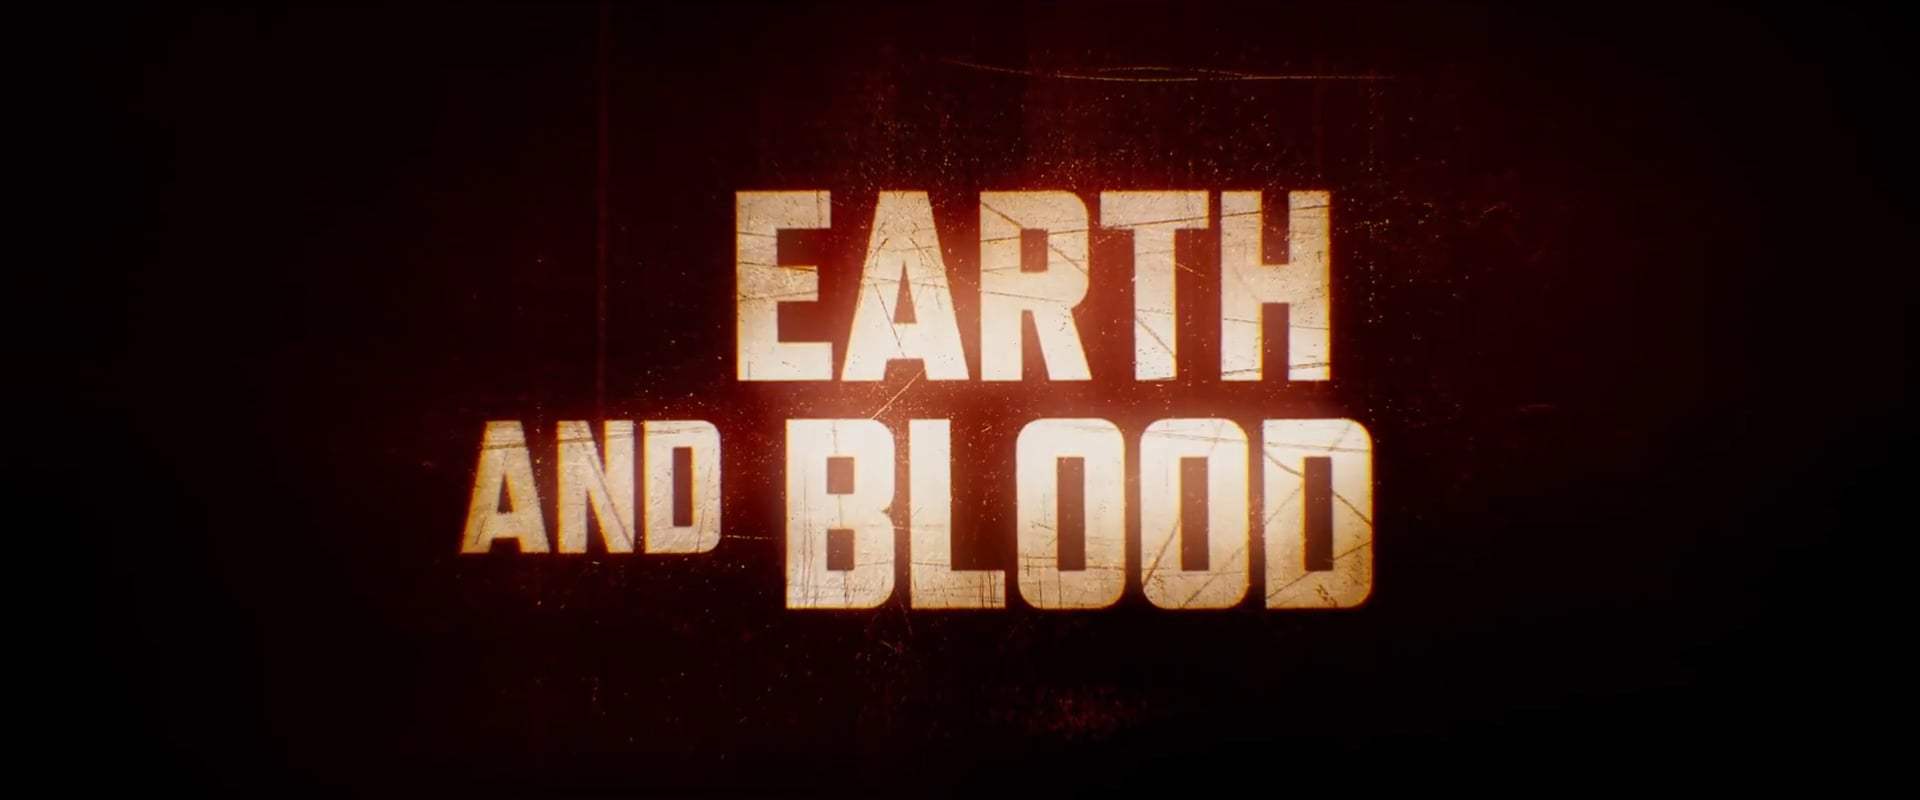 Earth and Blood Trailer (2020) Screen Capture #4